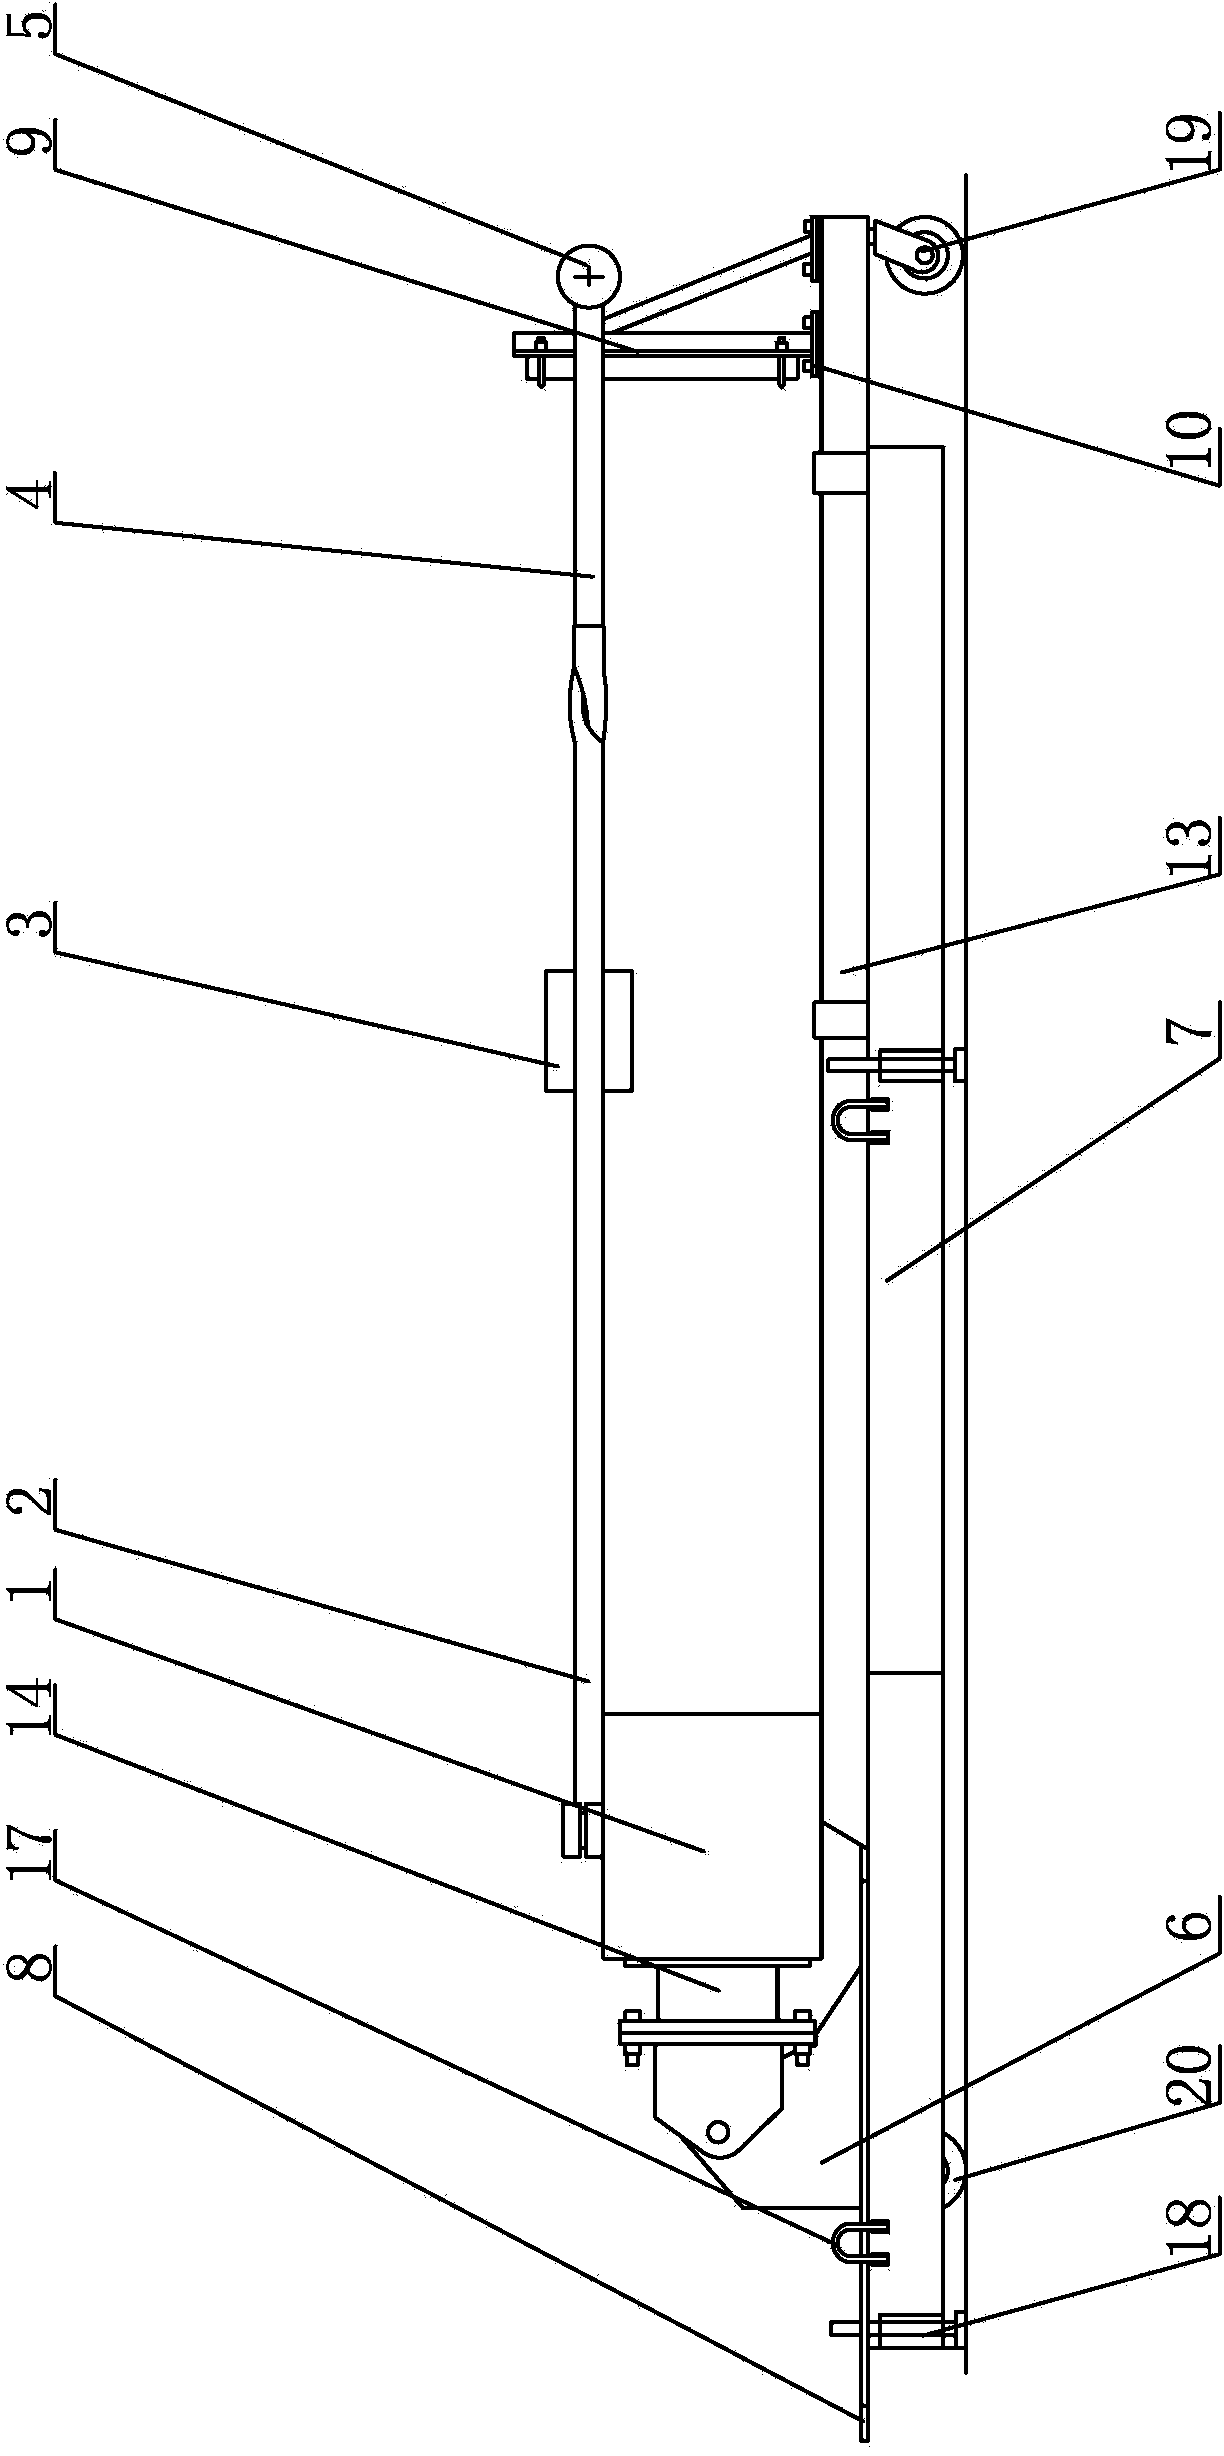 Overhauling training platform for disconnecting switch